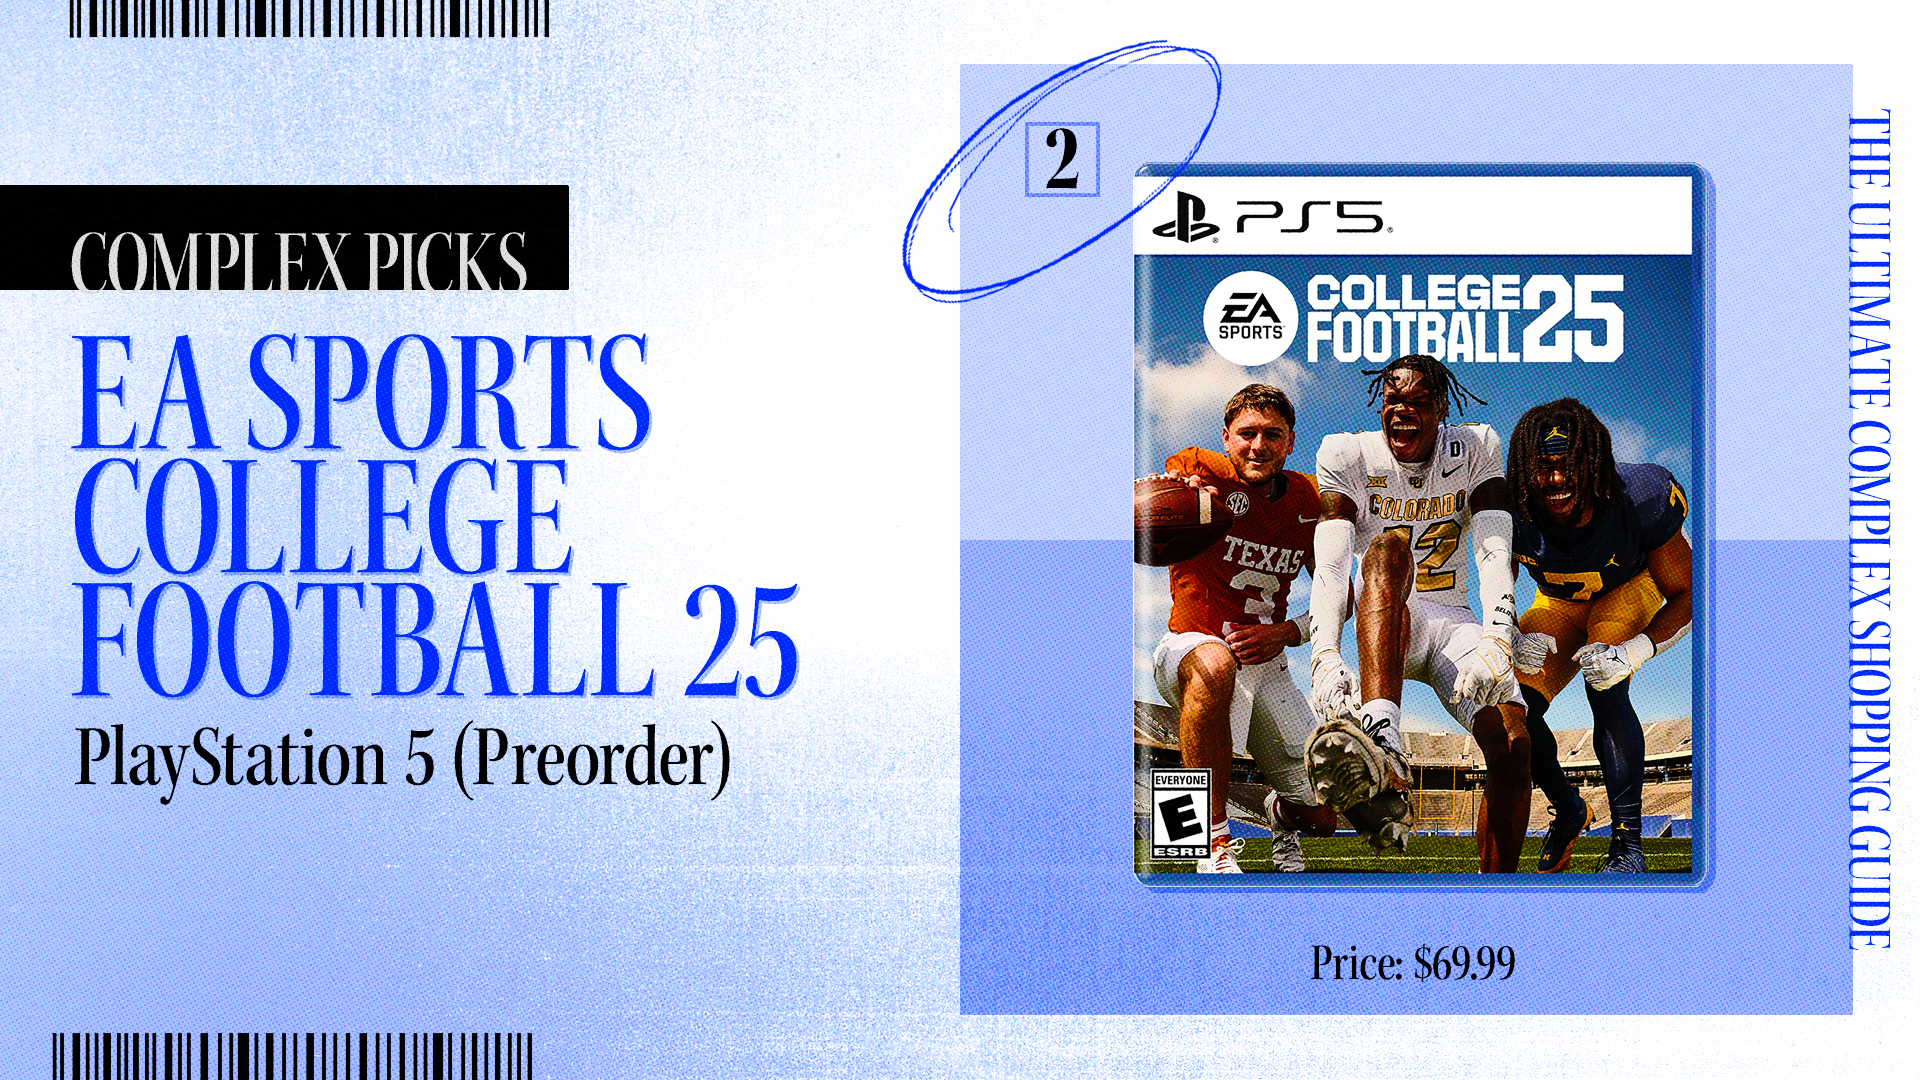 EA Sports College Football 25 PlayStation 5 preorder, ranking 2nd in Complex Picks, priced at $69.99. Featured players: Texas, Clemson, and Michigan State